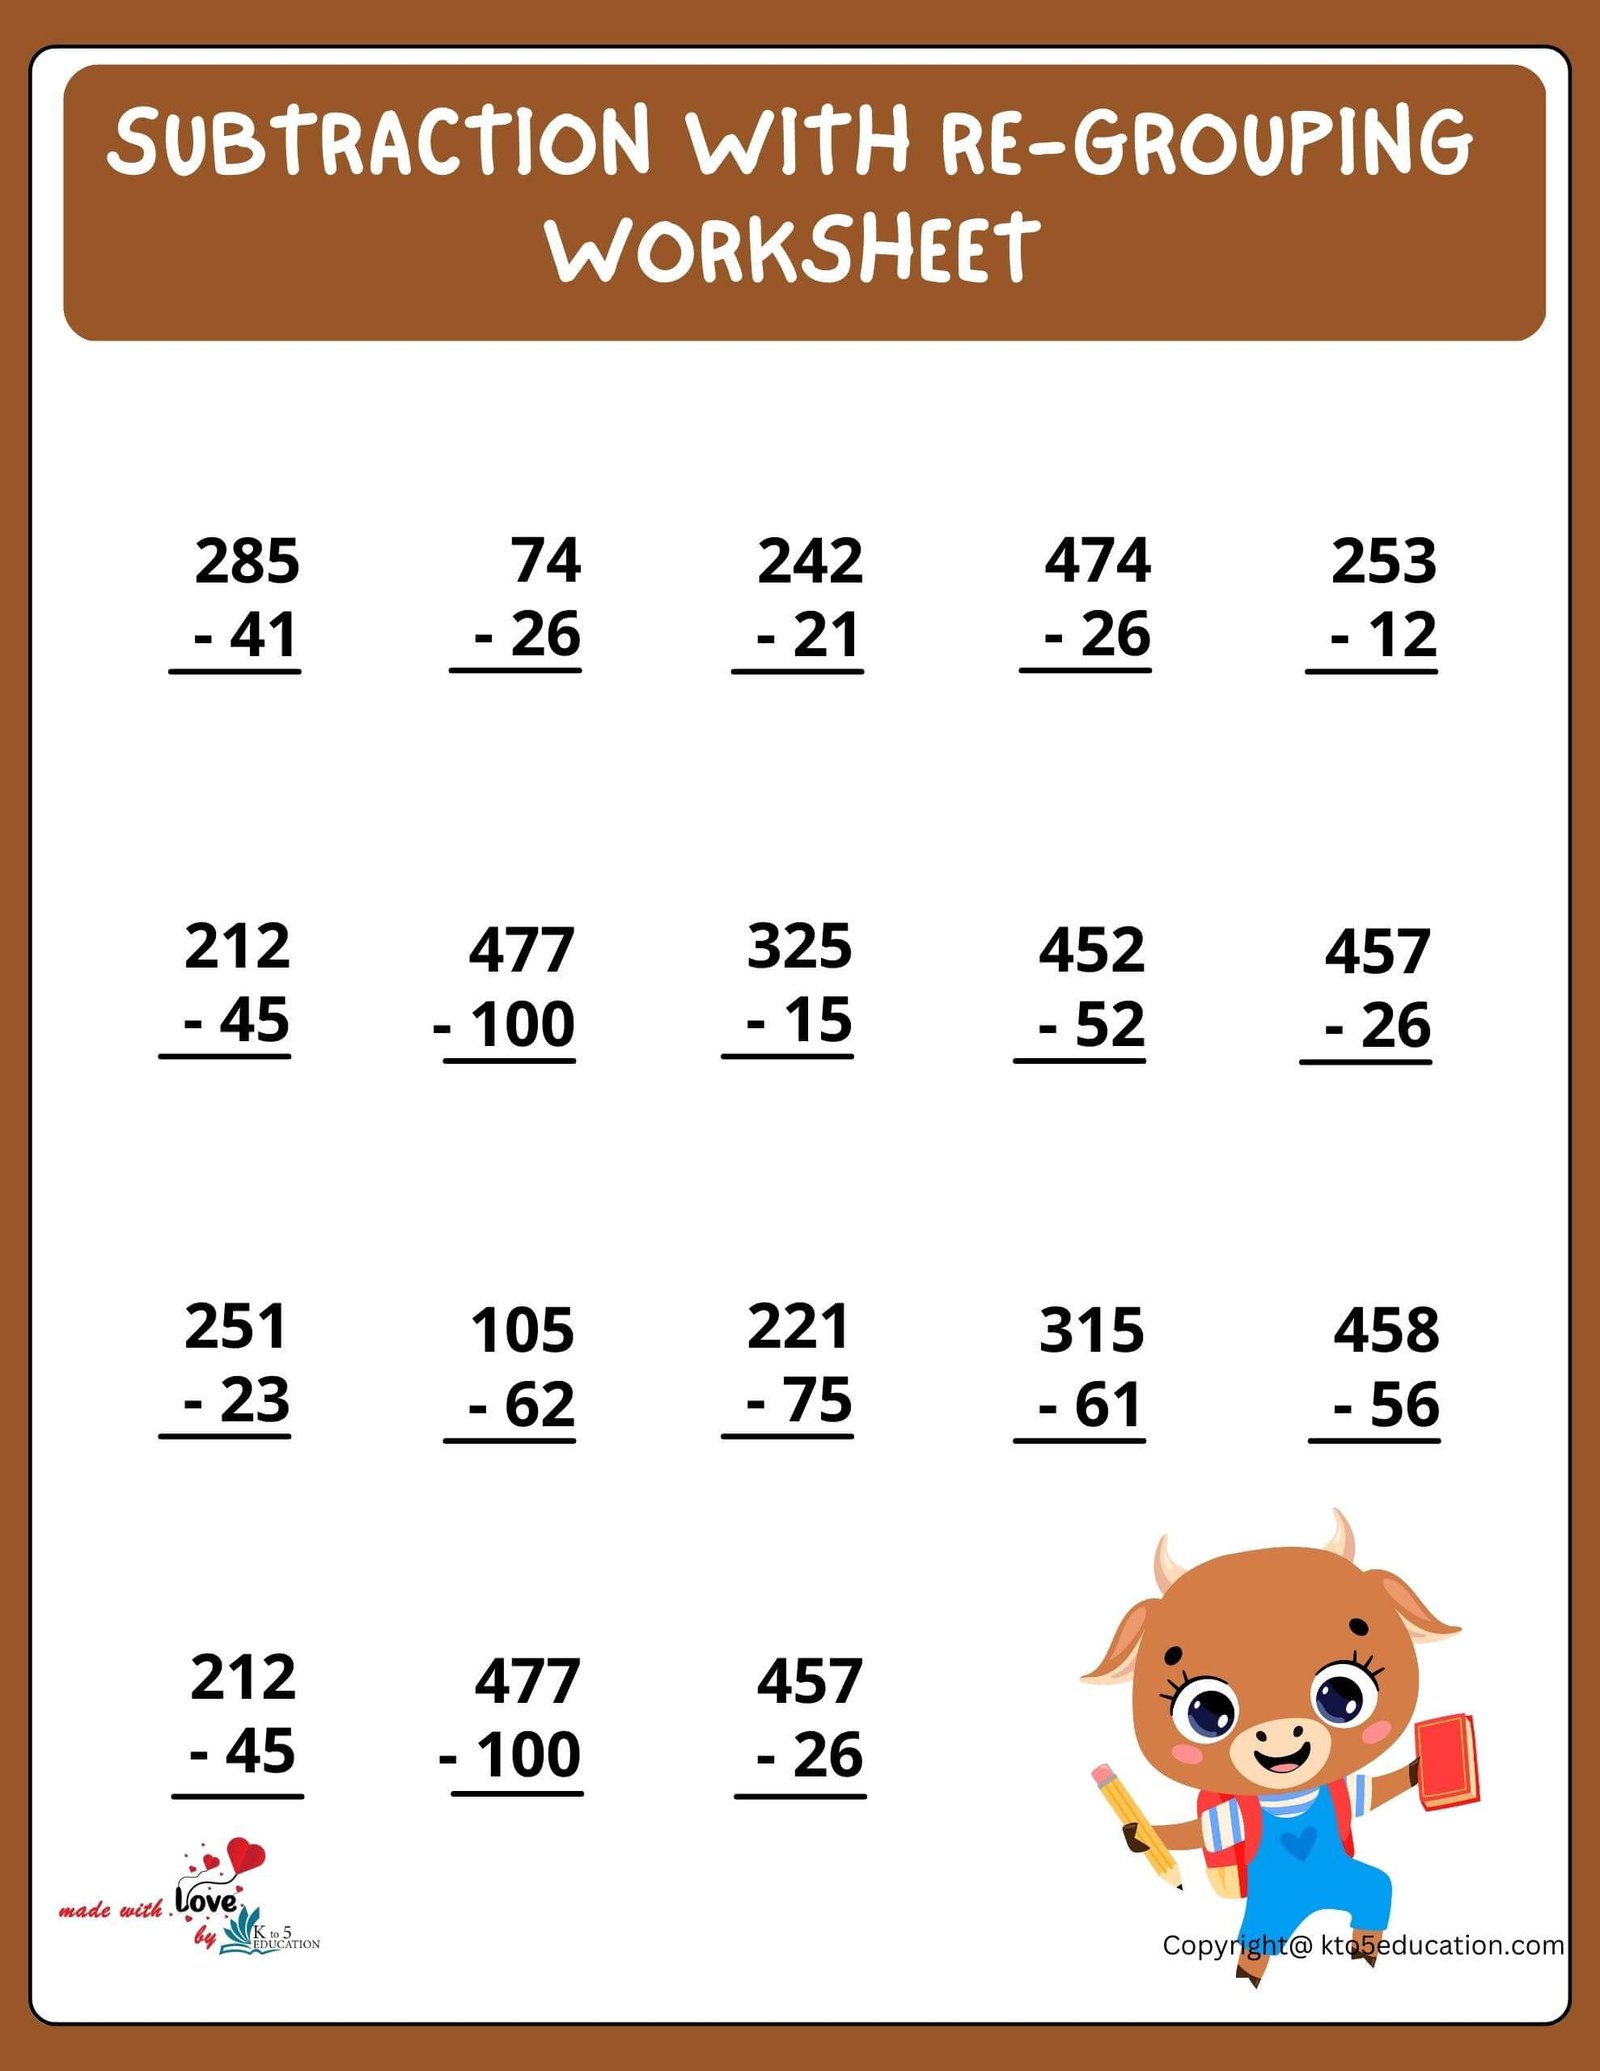 Subtraction With Re-Grouping Worksheet For Online